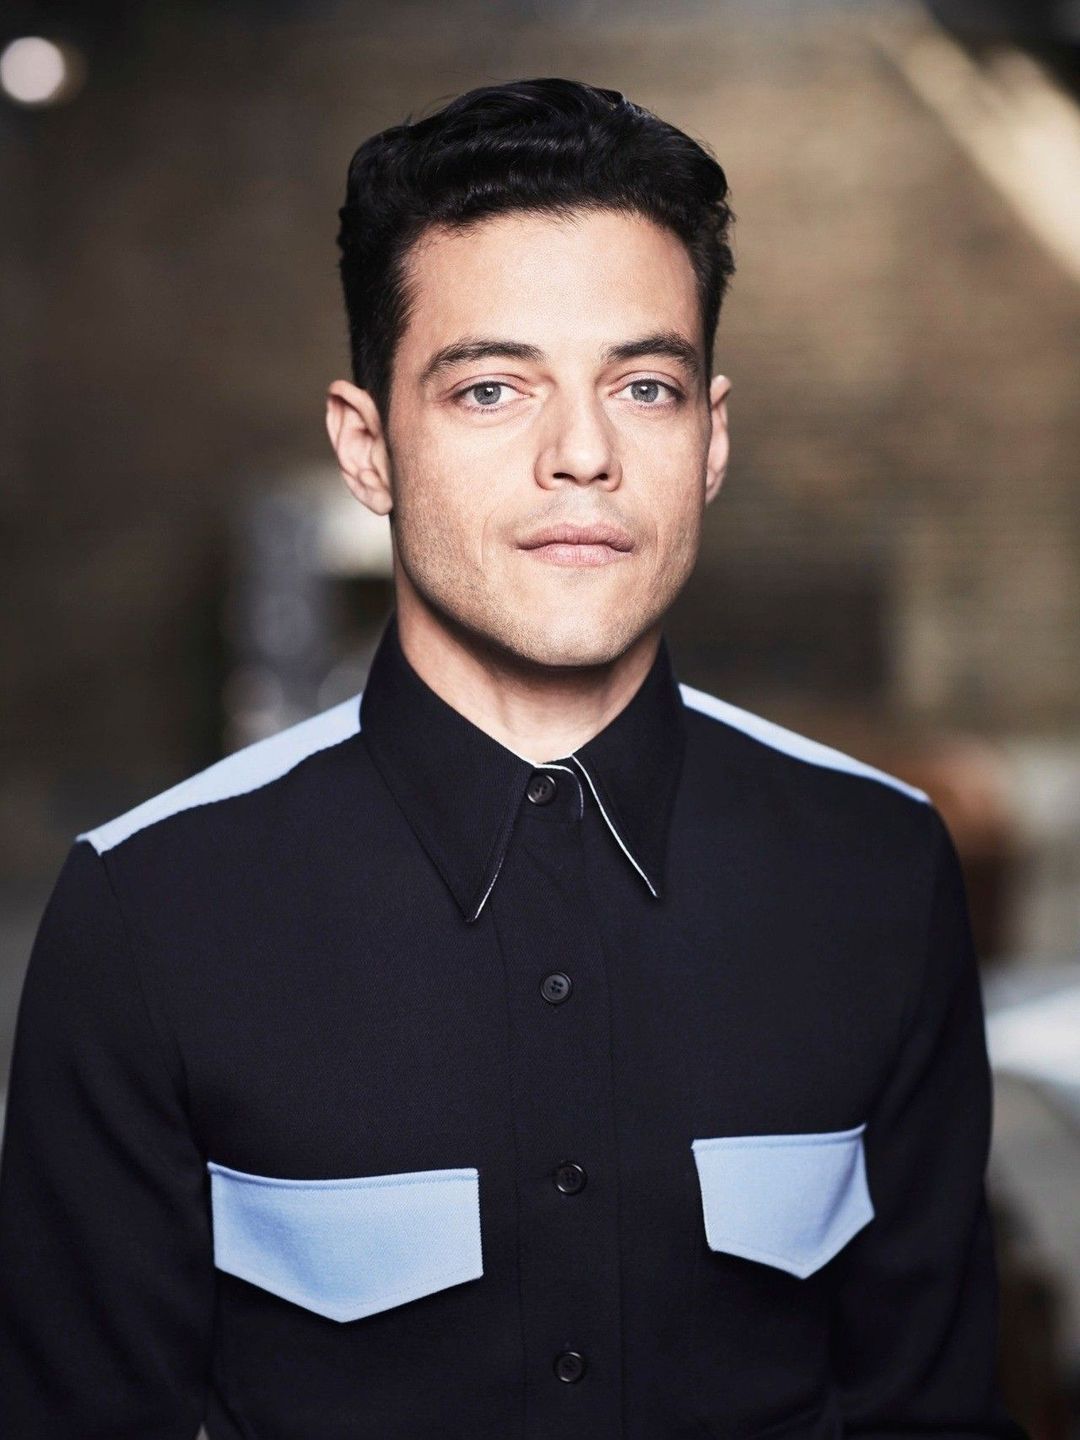 Rami Malek who is his father